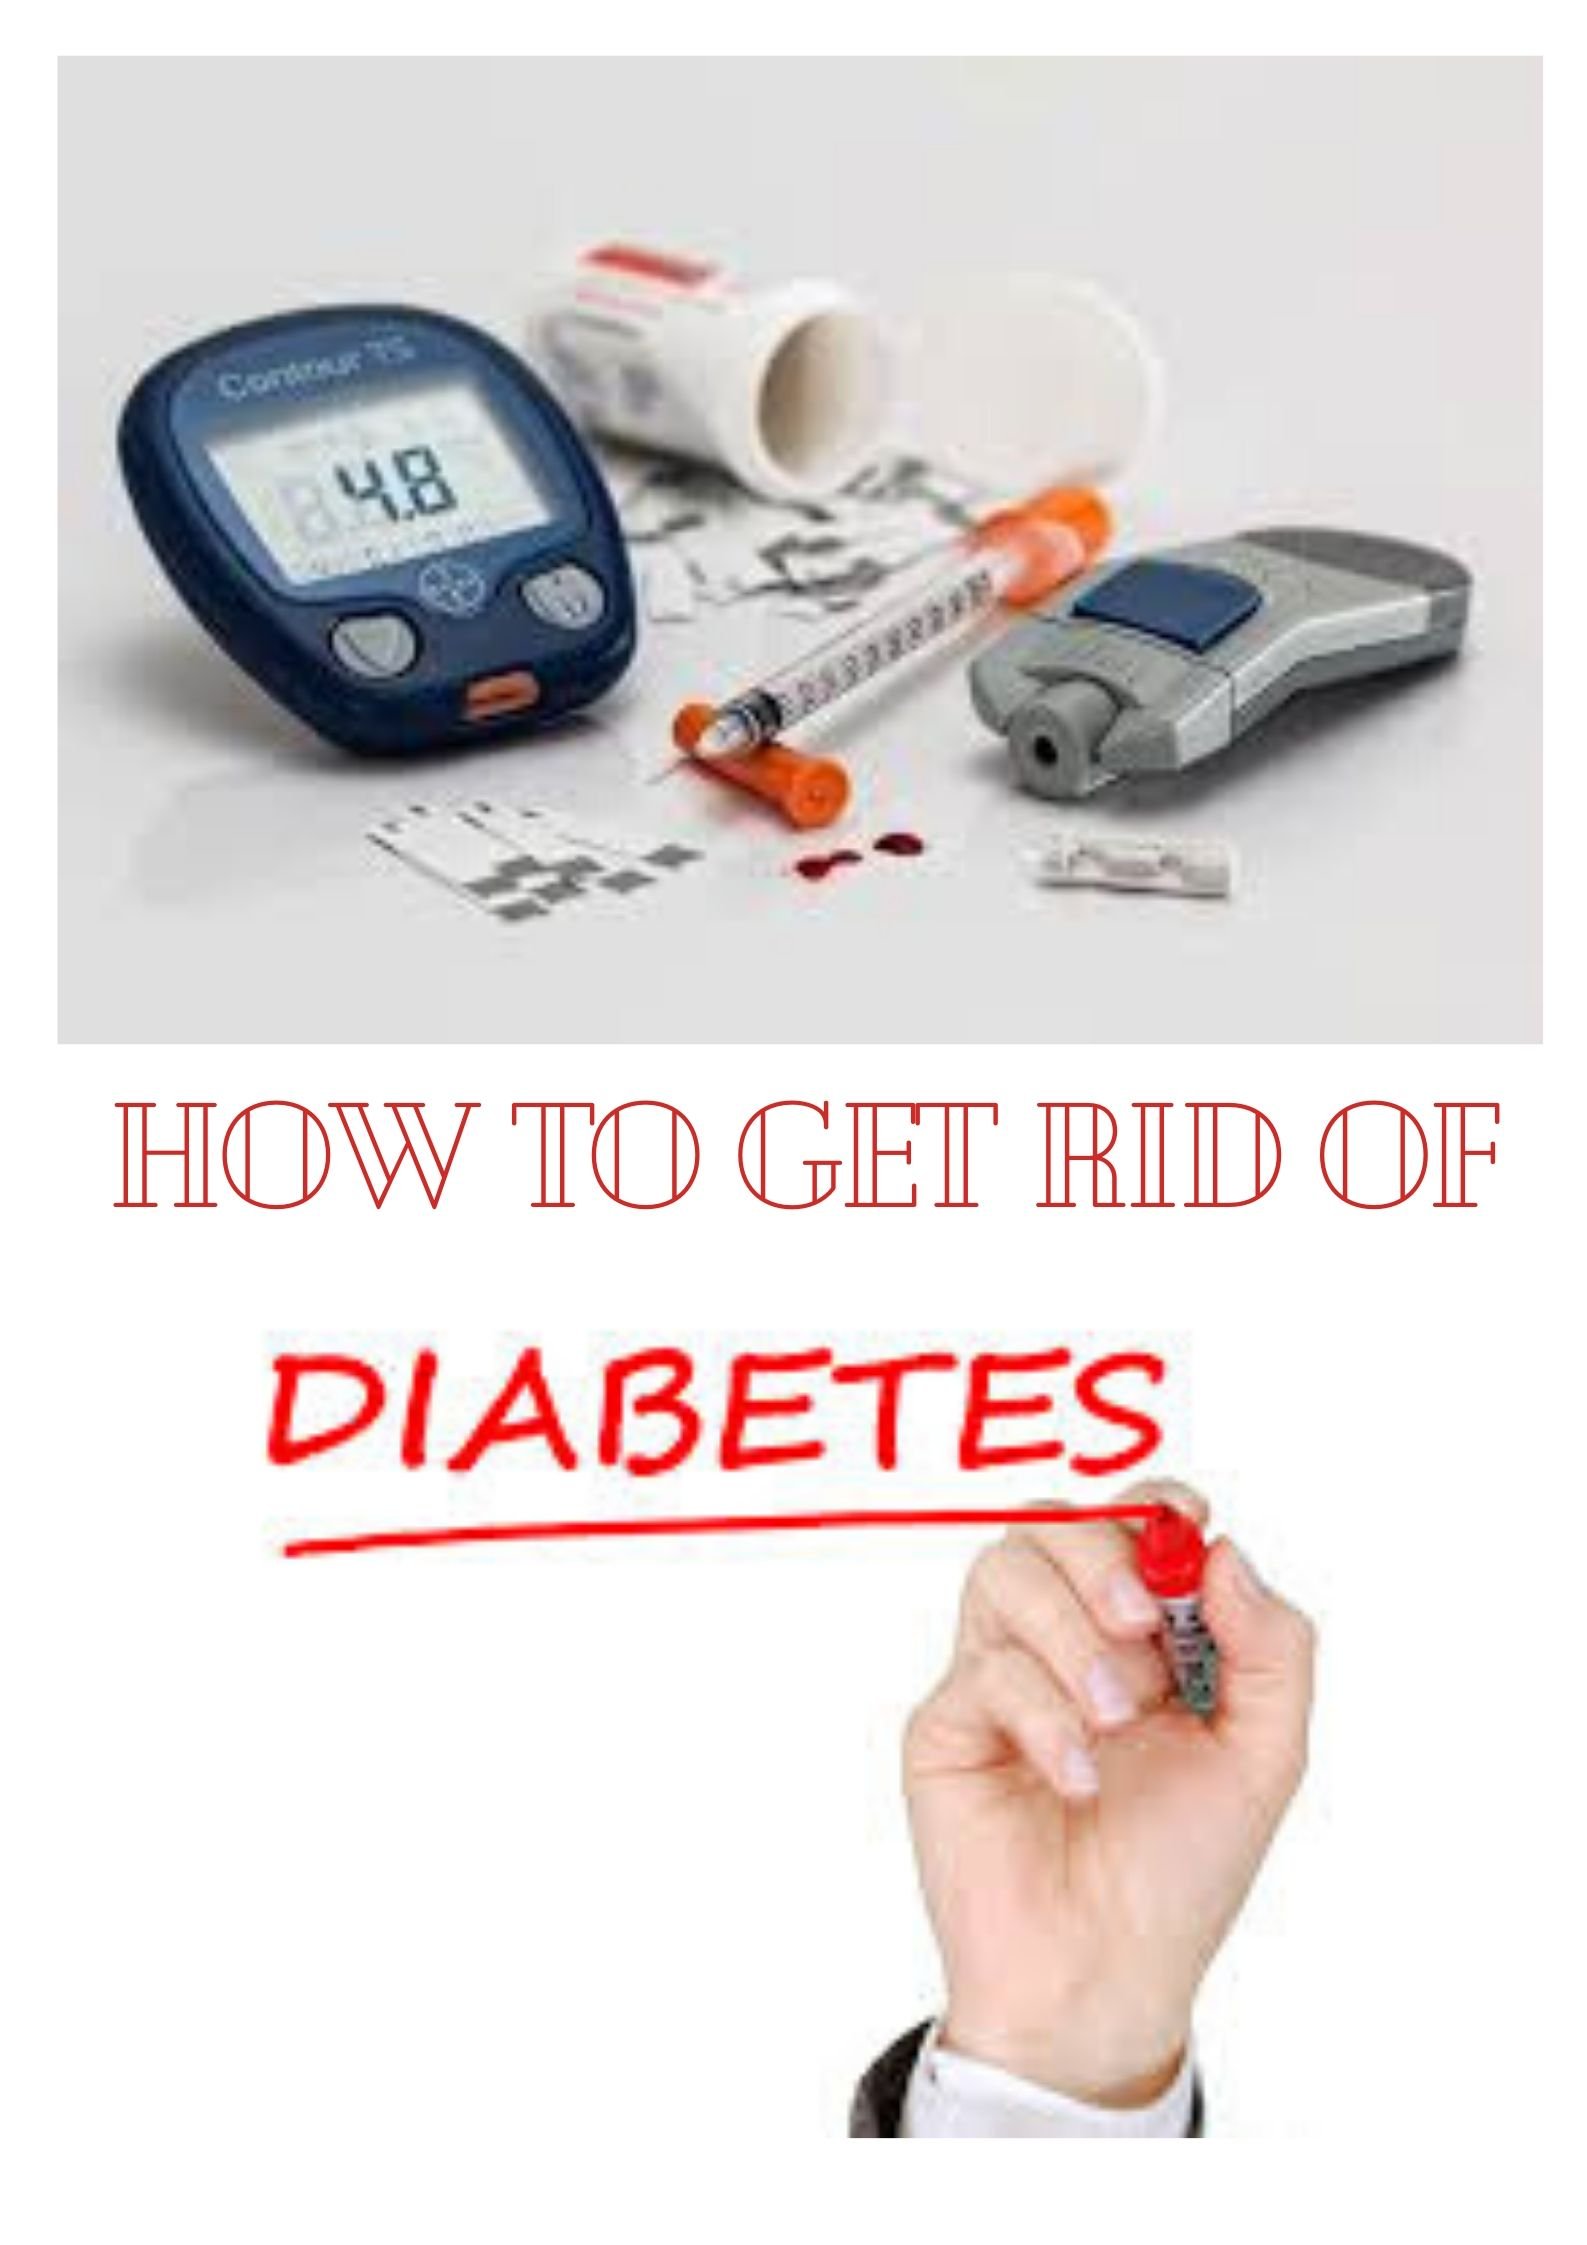 How to get rid of diabetes